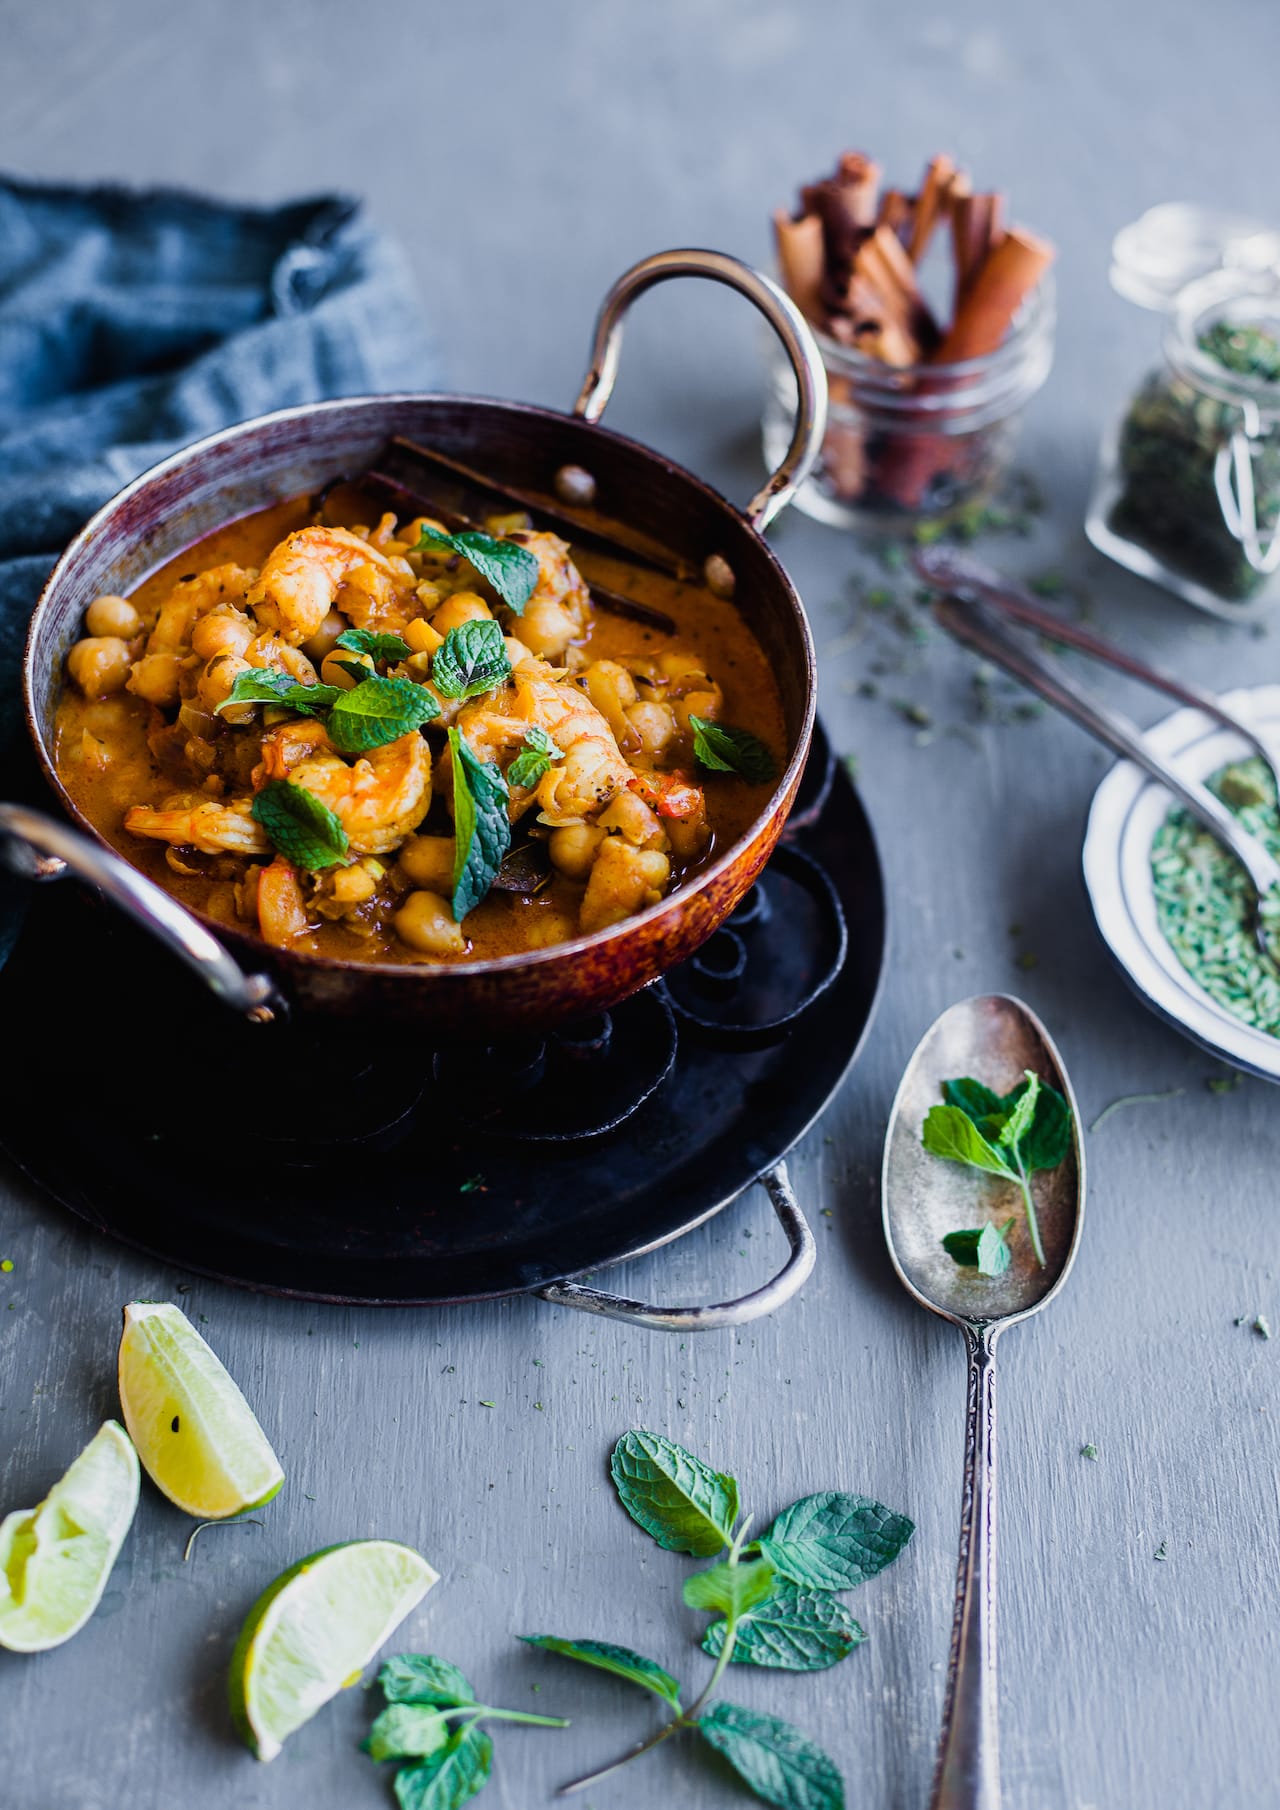 Chickpea And Shrimp Makhani | Playful Cooking